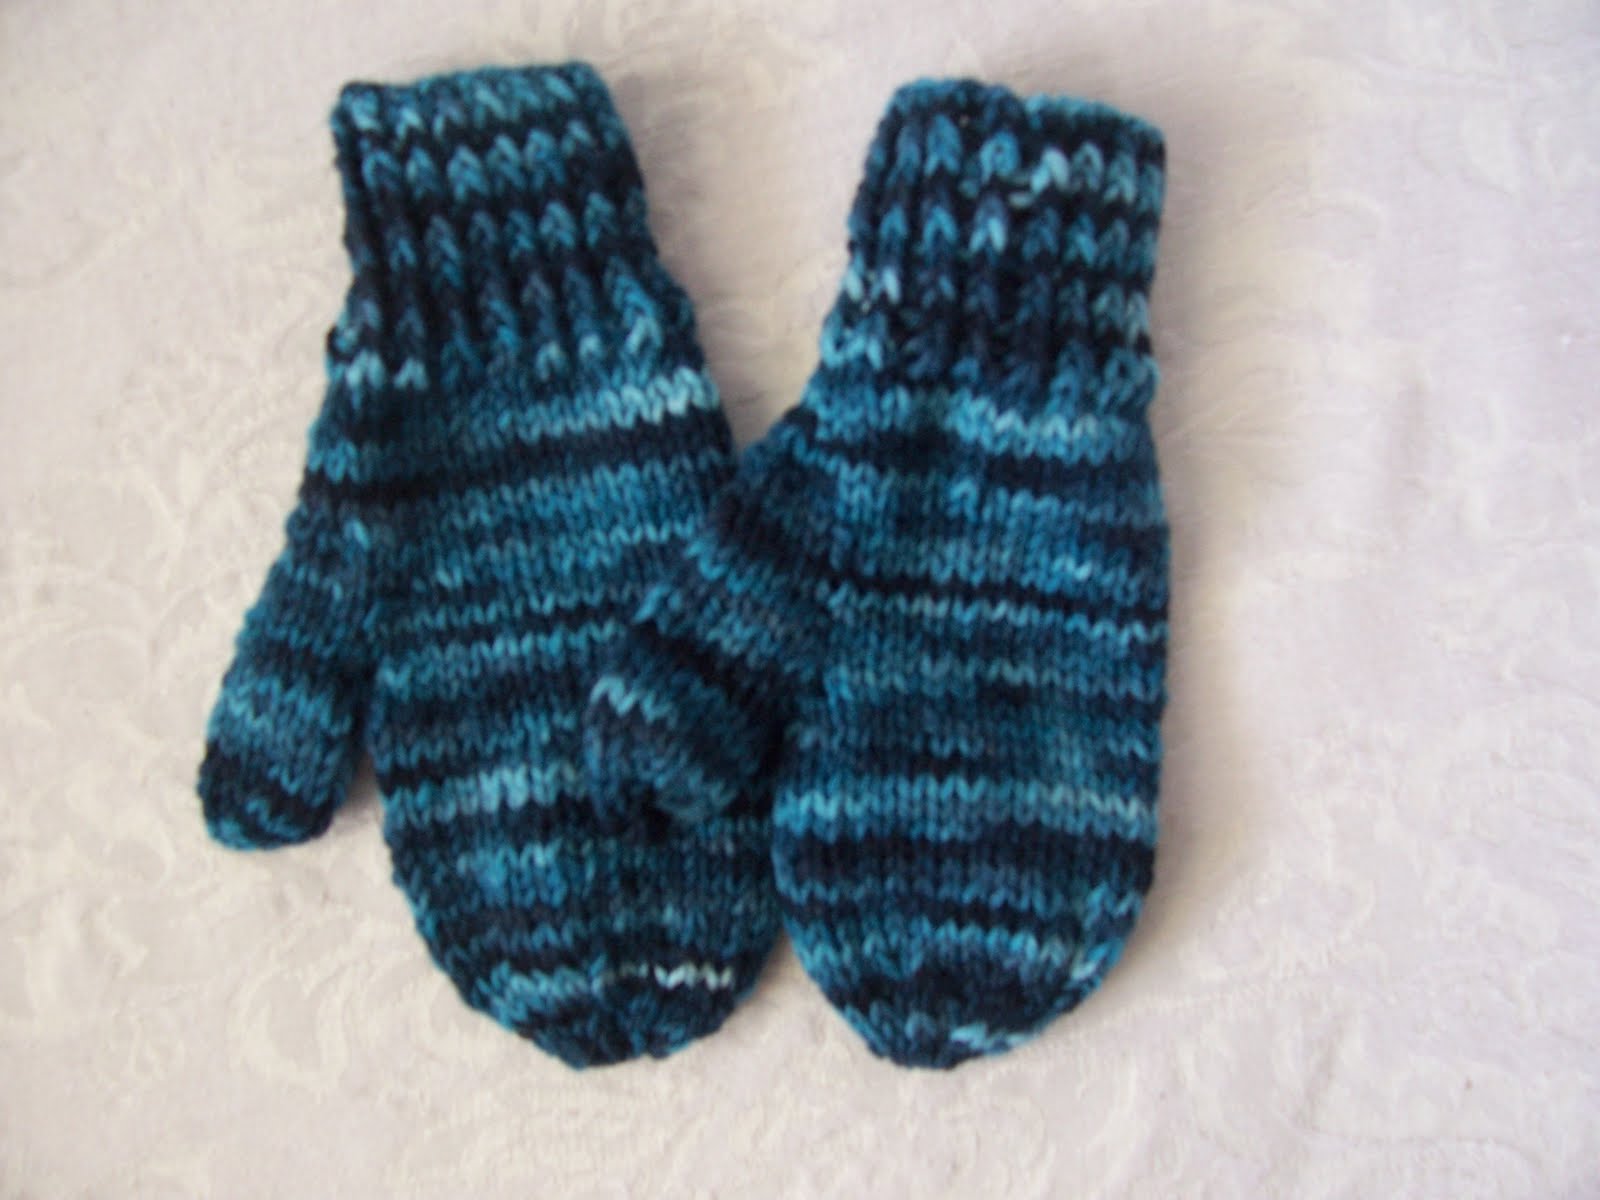 9 Best Images of Mitten Knitting Patterns Free Printable ...